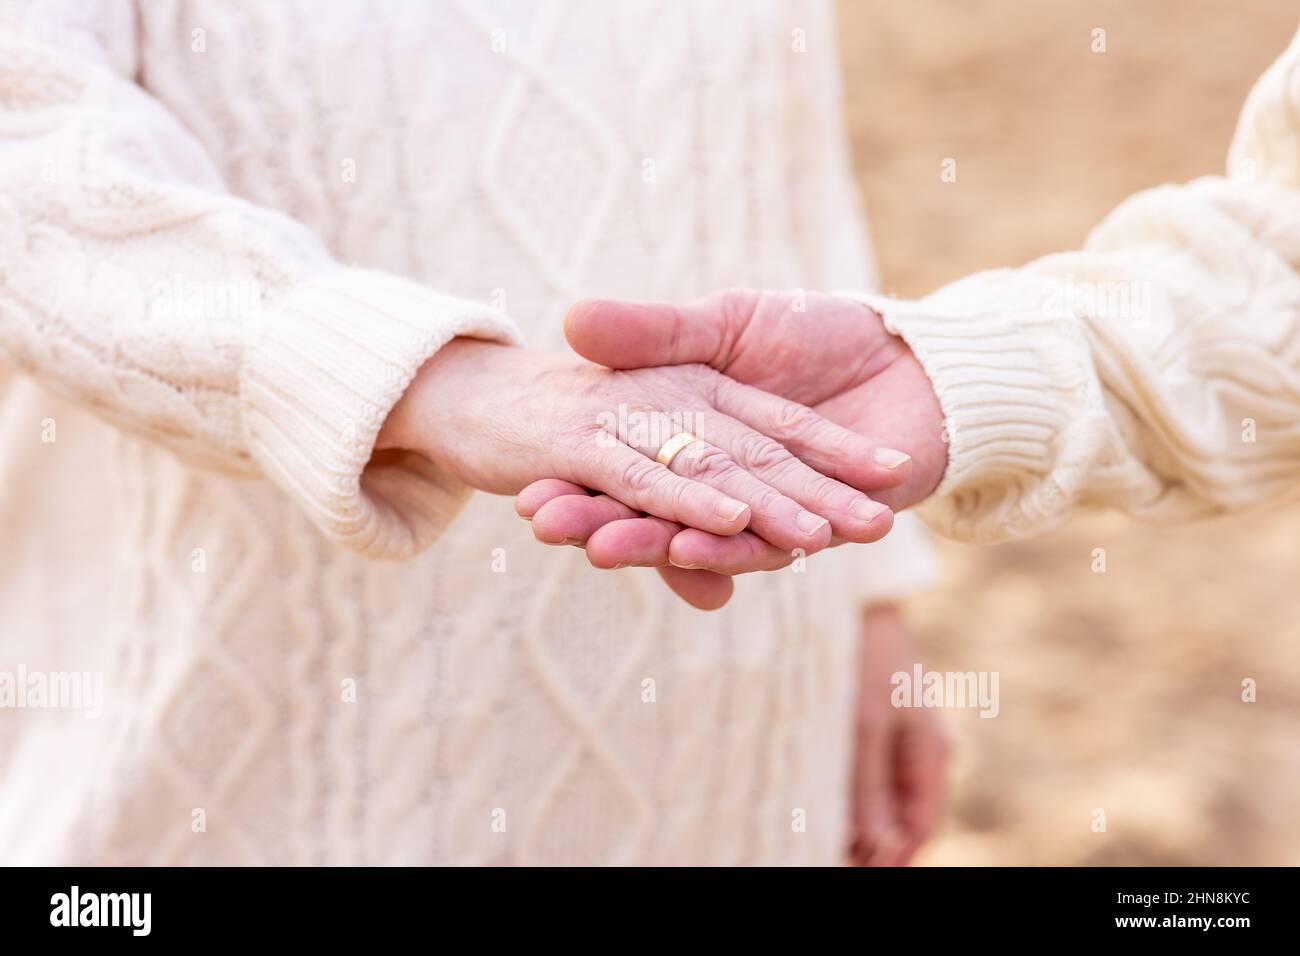 Closeup of the elderly couple. The man holding the woman's hand with a golden ring. Stock Photo